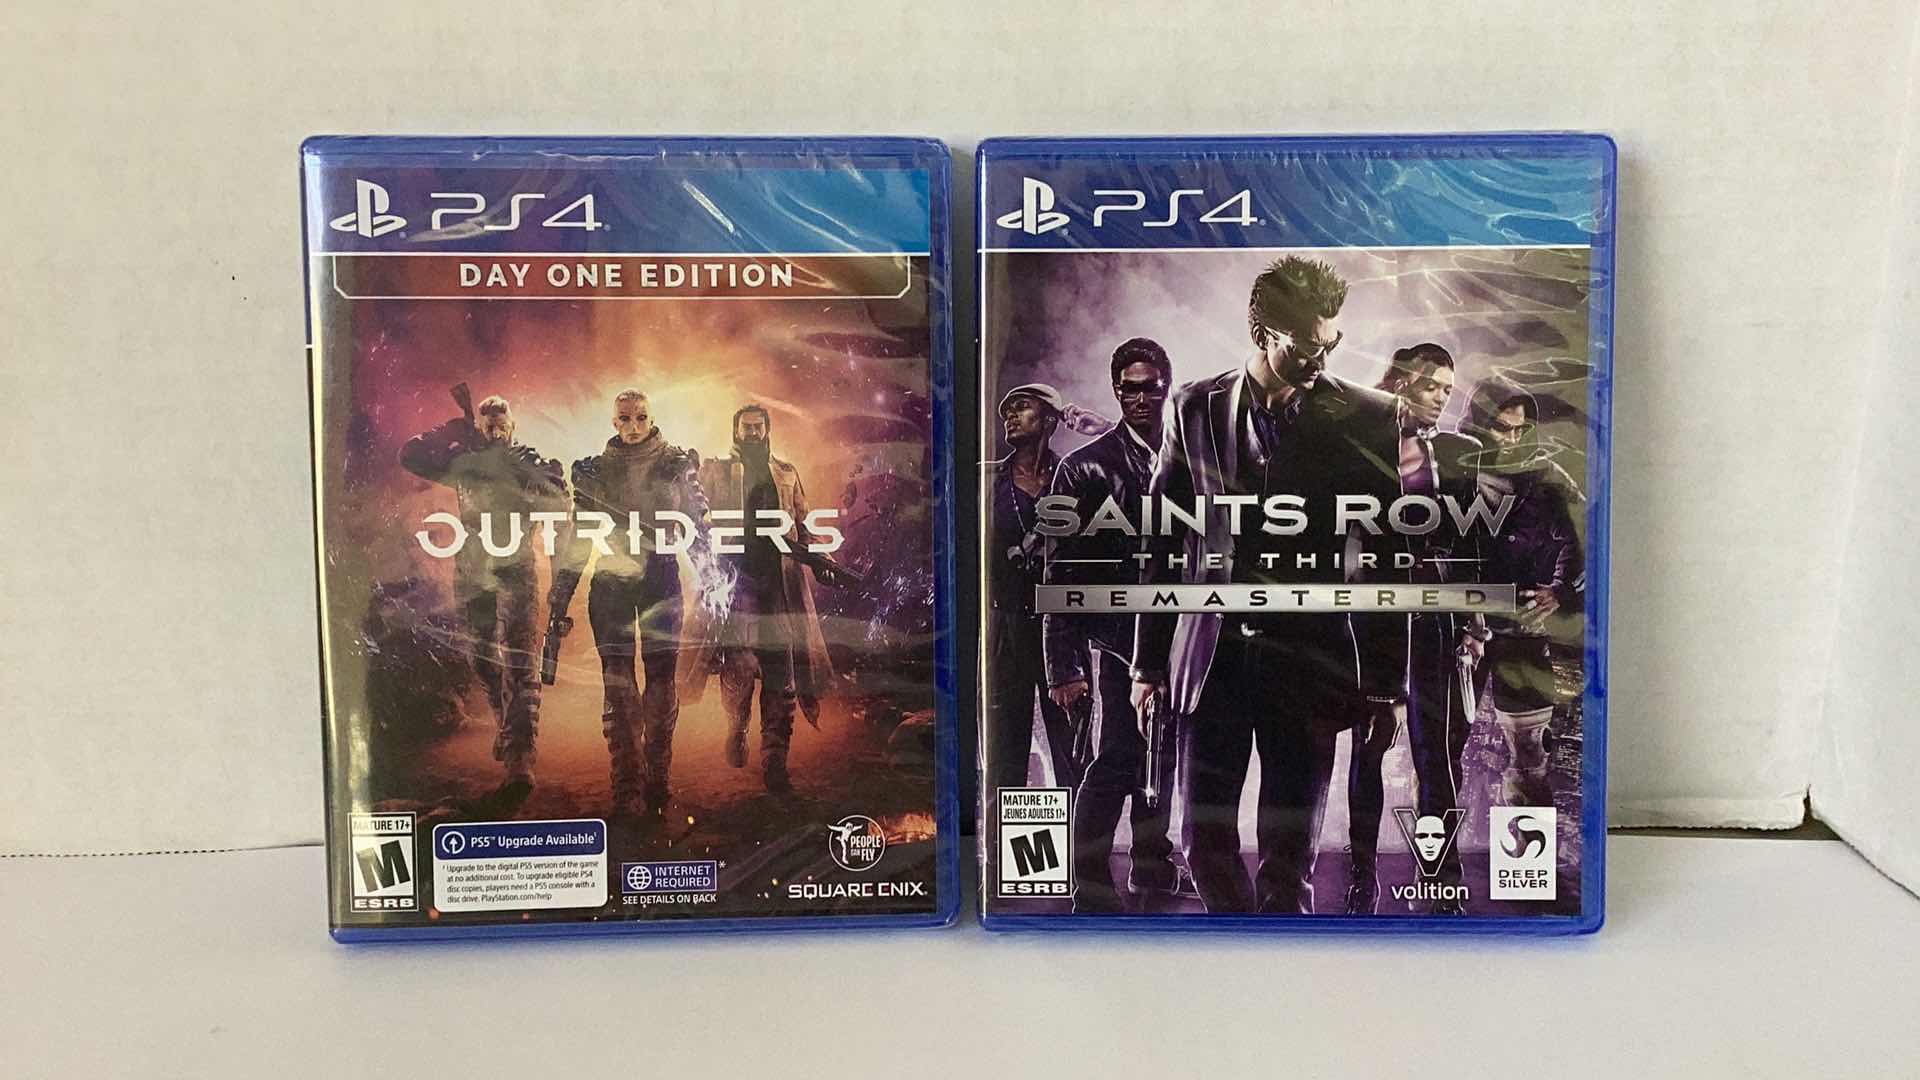 Photo 1 of 2 NEW PS4 GAMES: OUTRIDERS AND SAINTS ROW THE THIRD REMASTERED